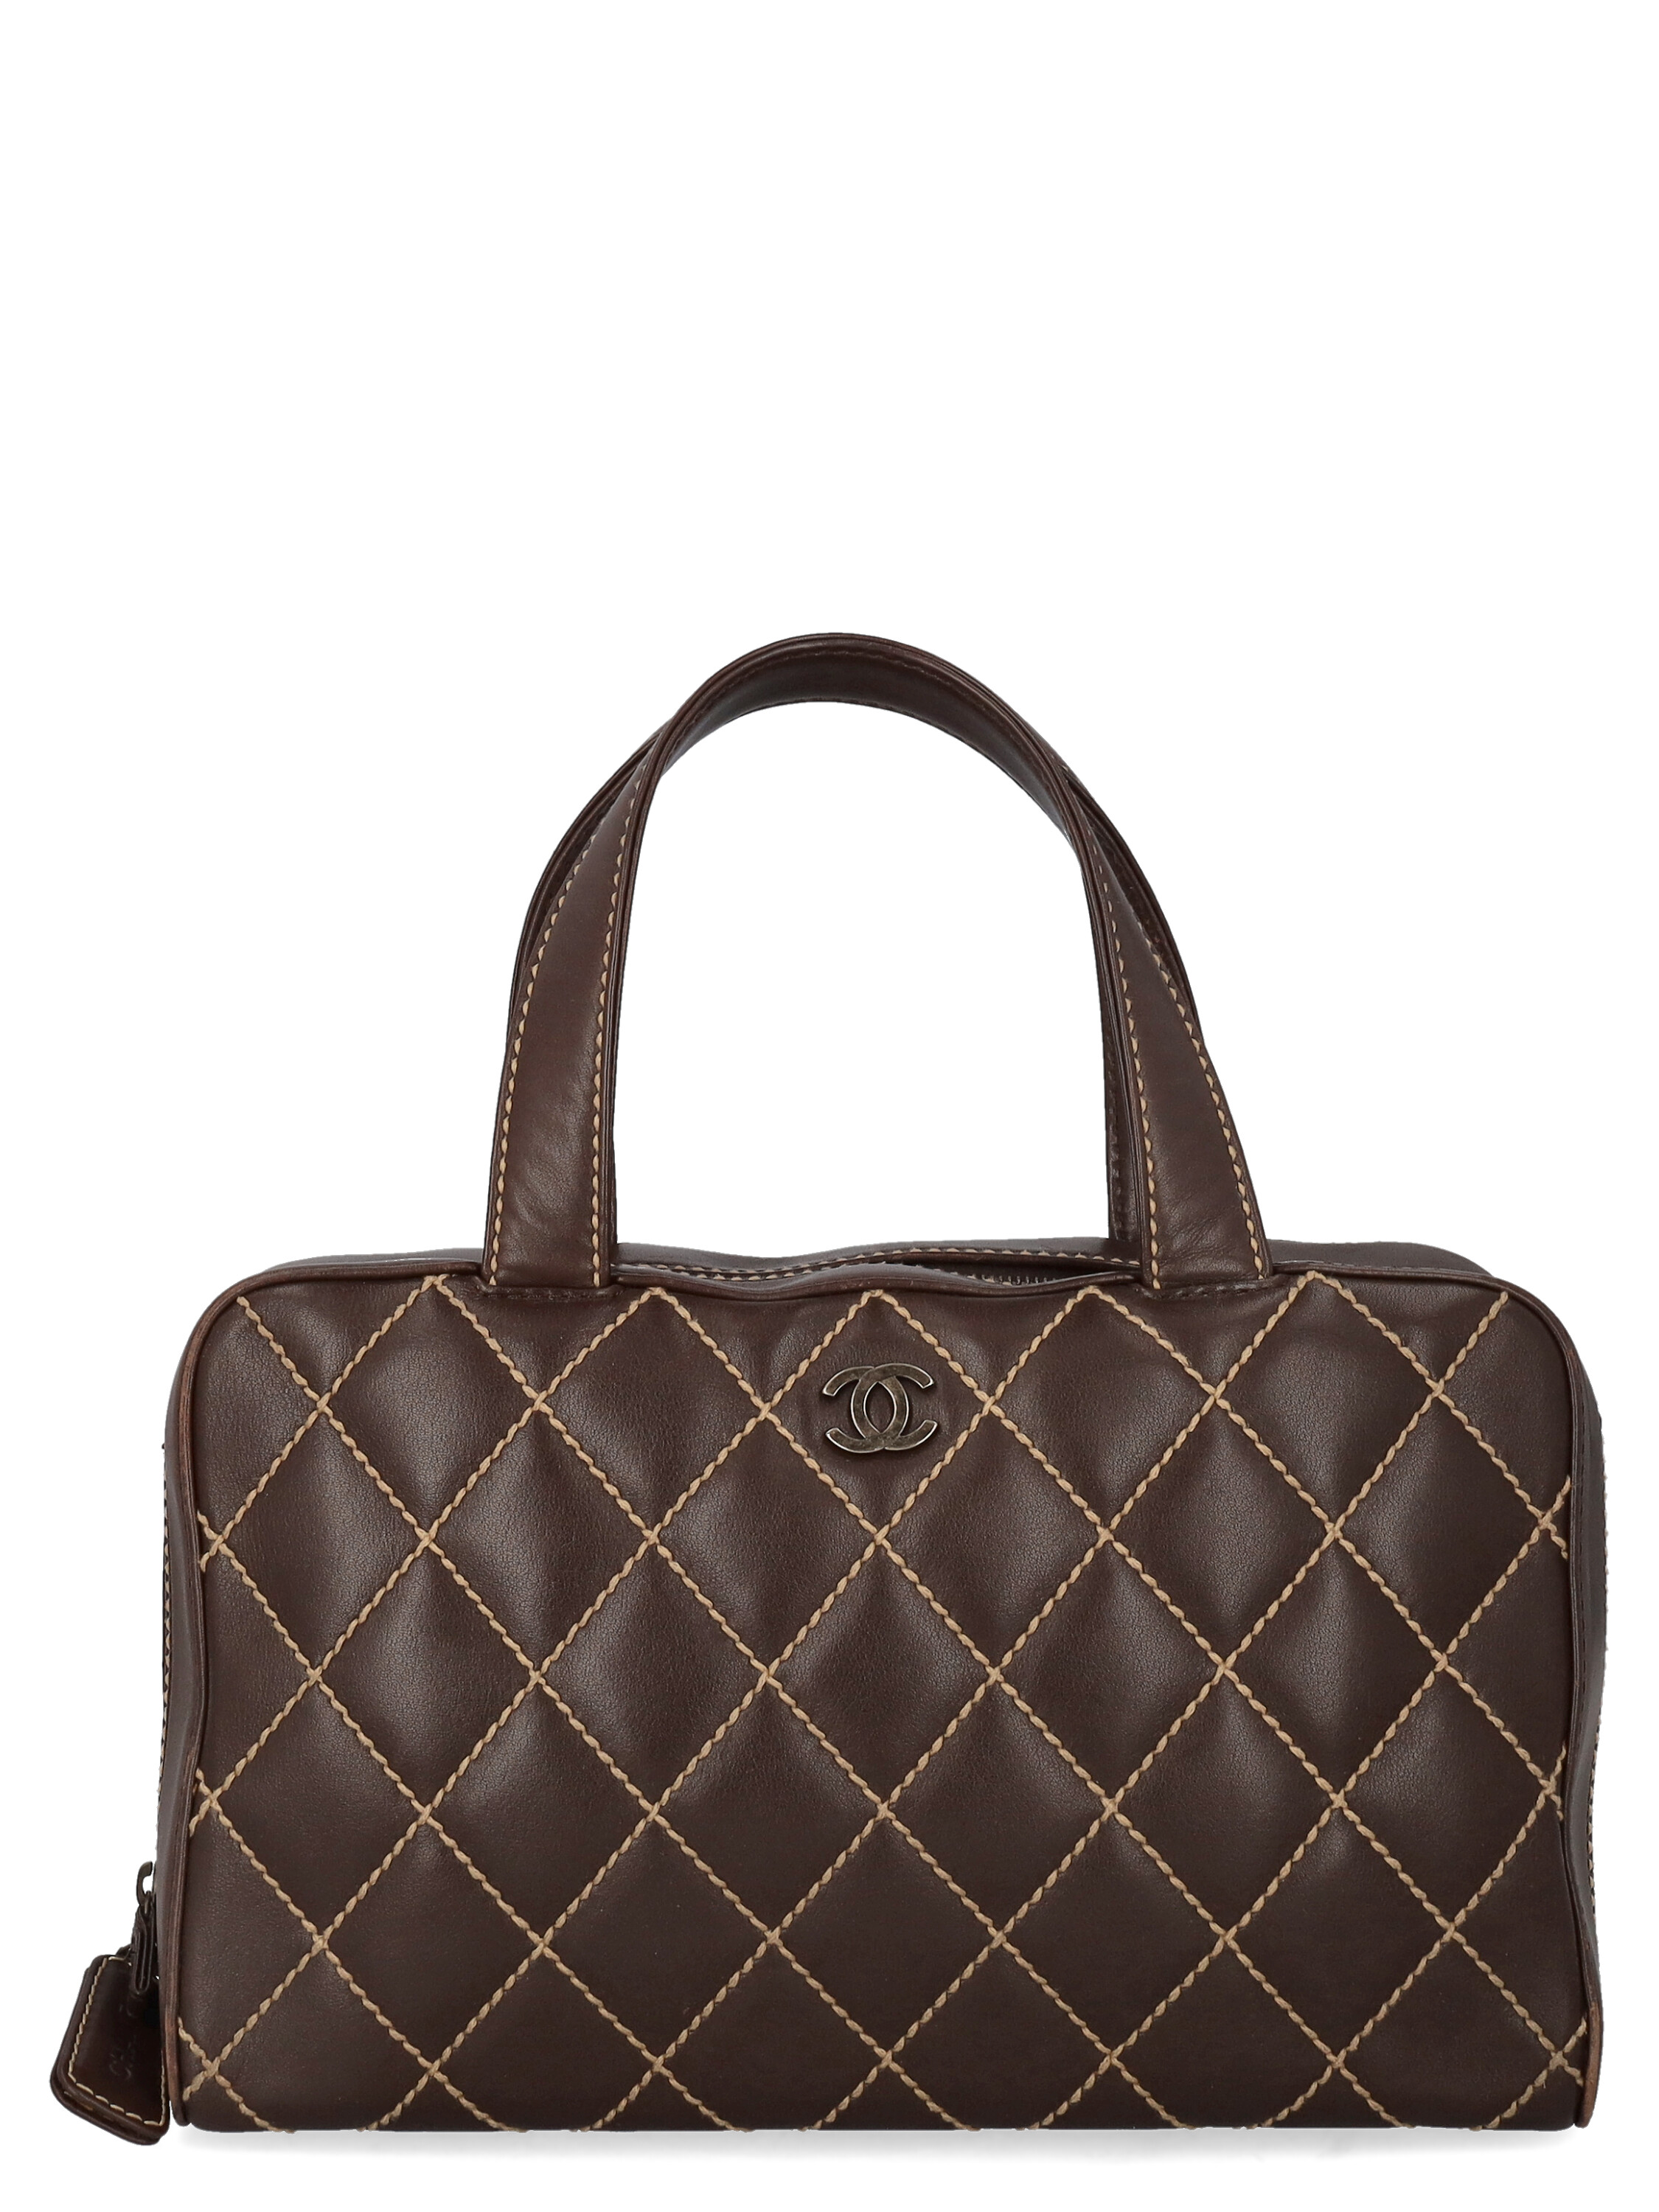 Pre-owned Chanel Women's Handbags -  - In Brown Leather